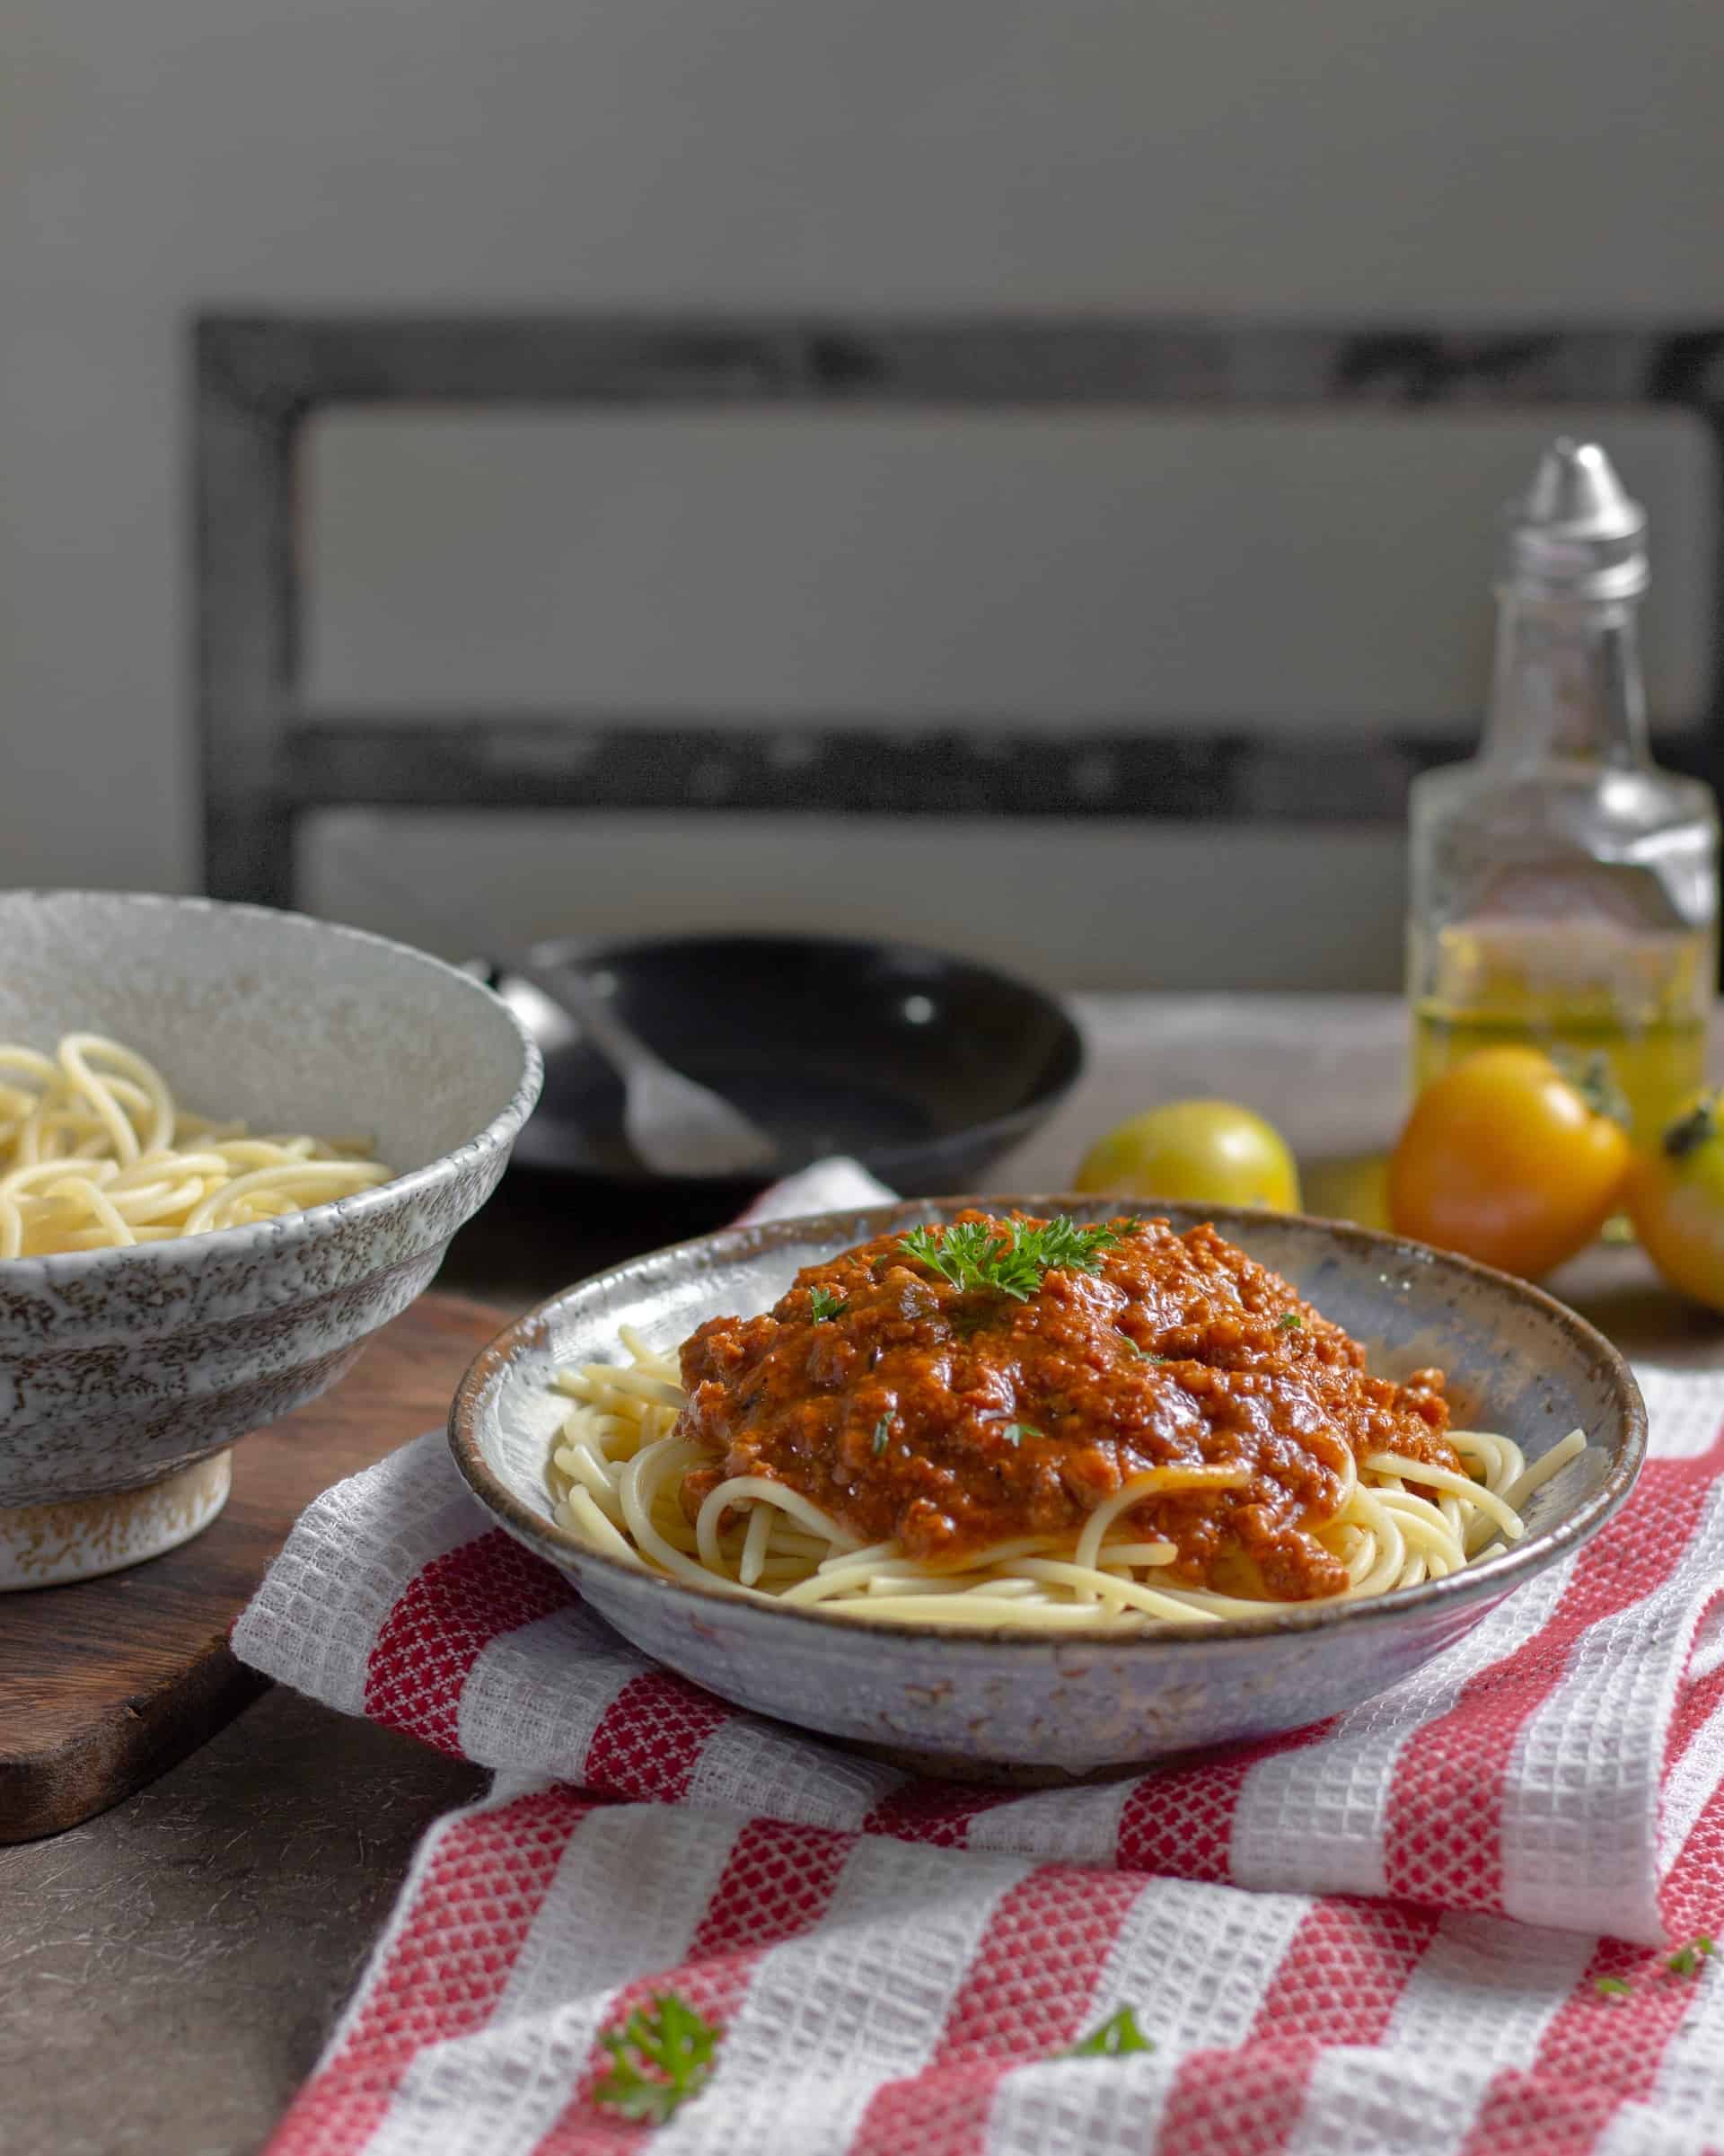 A bowl of spaghetti bolognese on a red and white striped cloth with olive oil and a plain pasta bowl in the background.